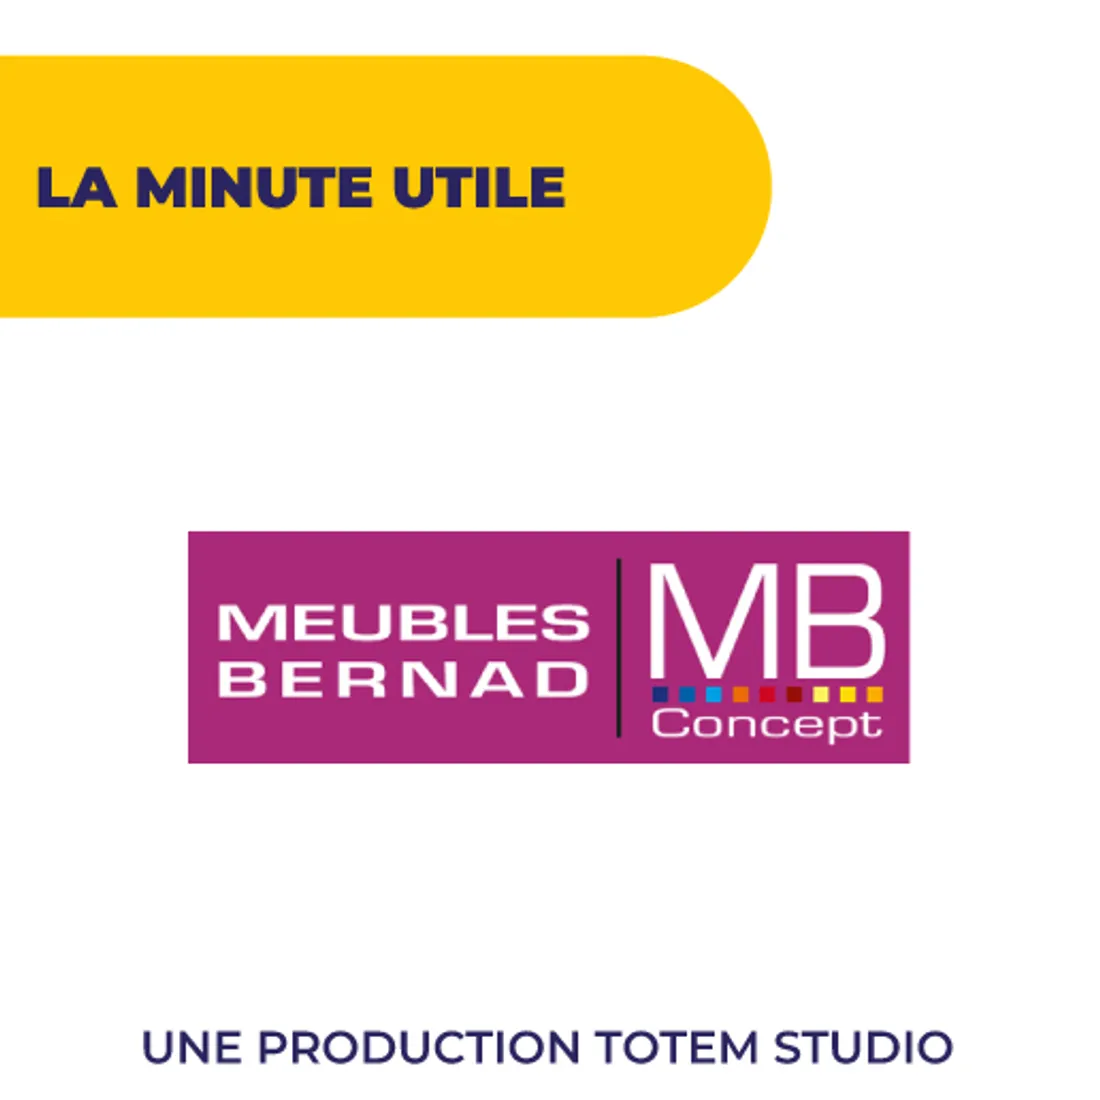 Minute utile MB Concept